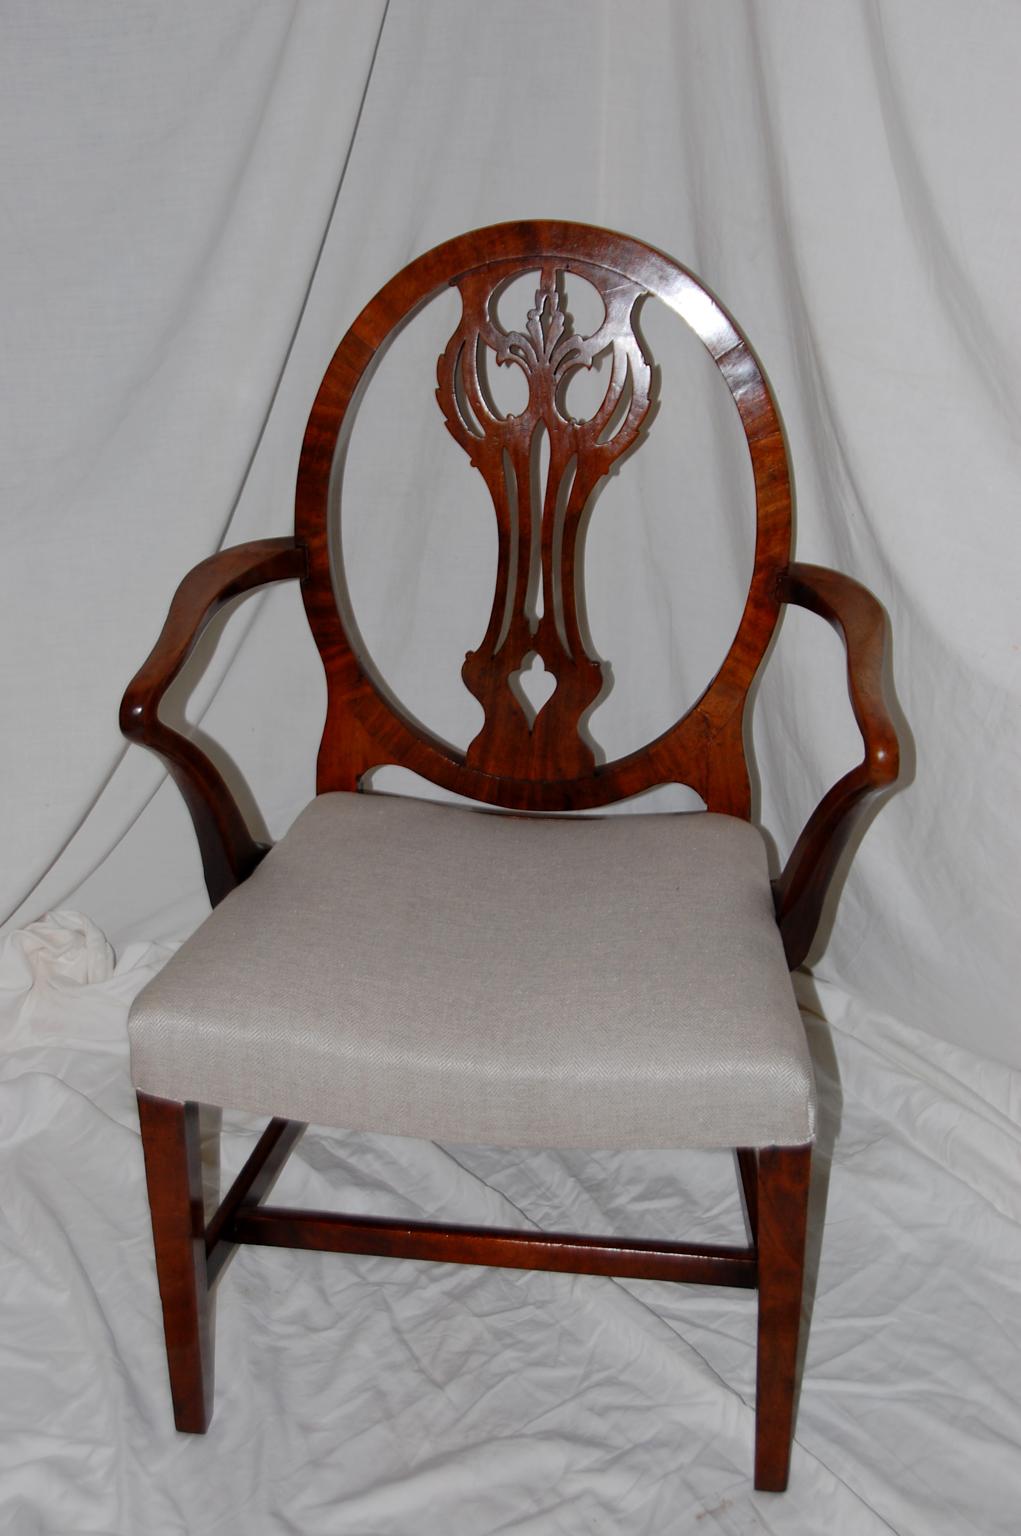 English Georgian Period Hepplewhite Armchair with Oval Back and Carved Splat In Good Condition For Sale In Wells, ME